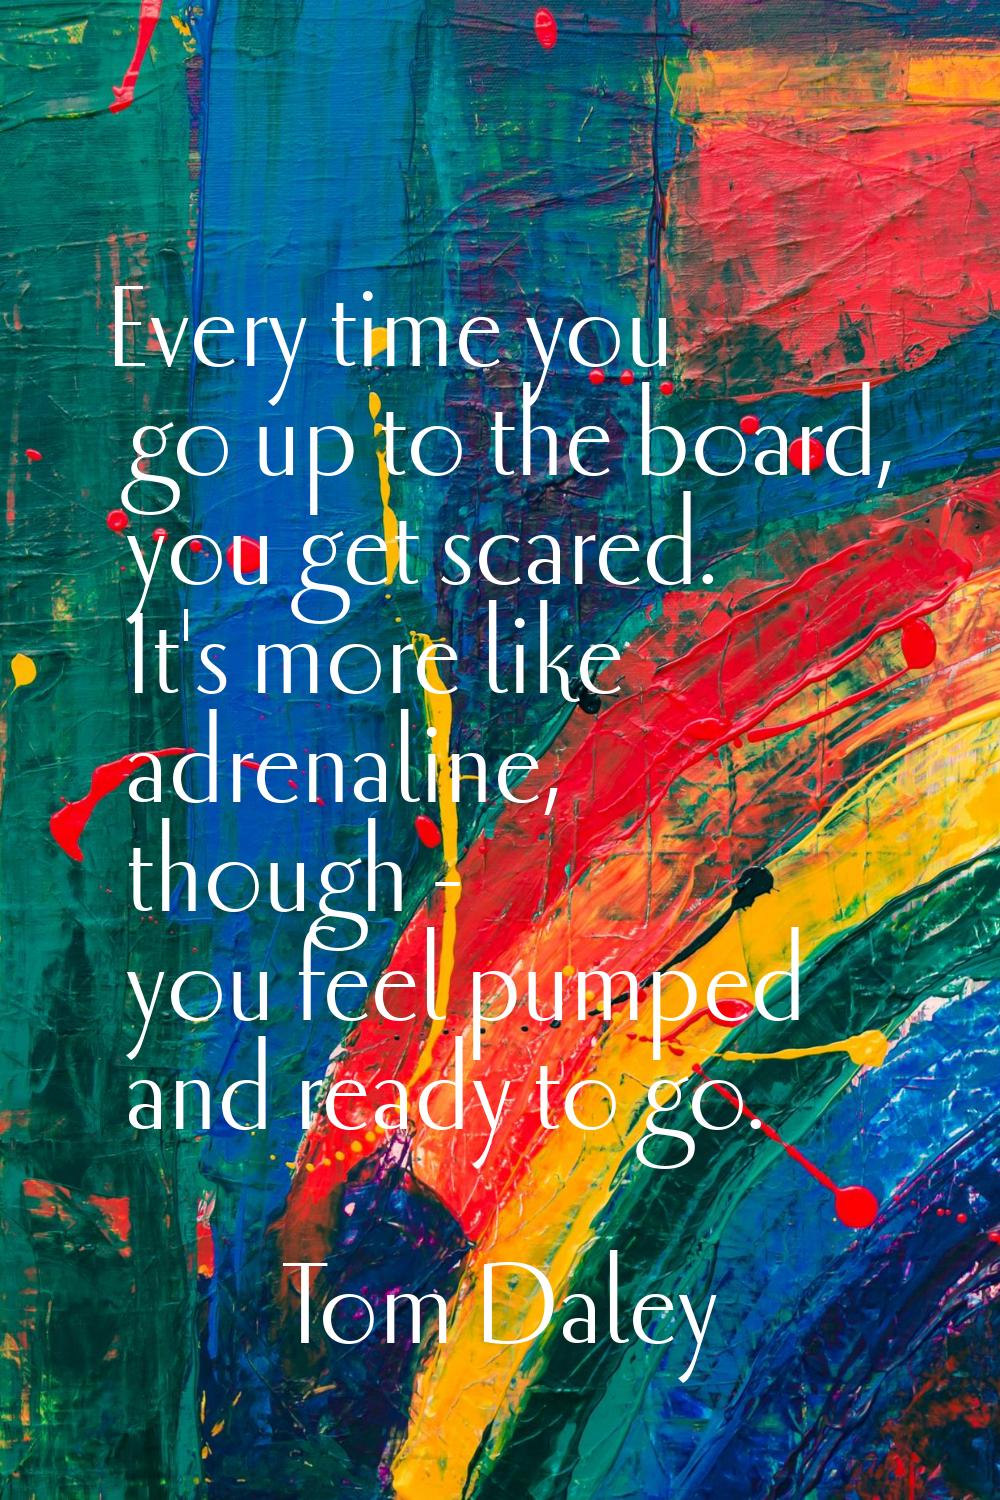 Every time you go up to the board, you get scared. It's more like adrenaline, though - you feel pum